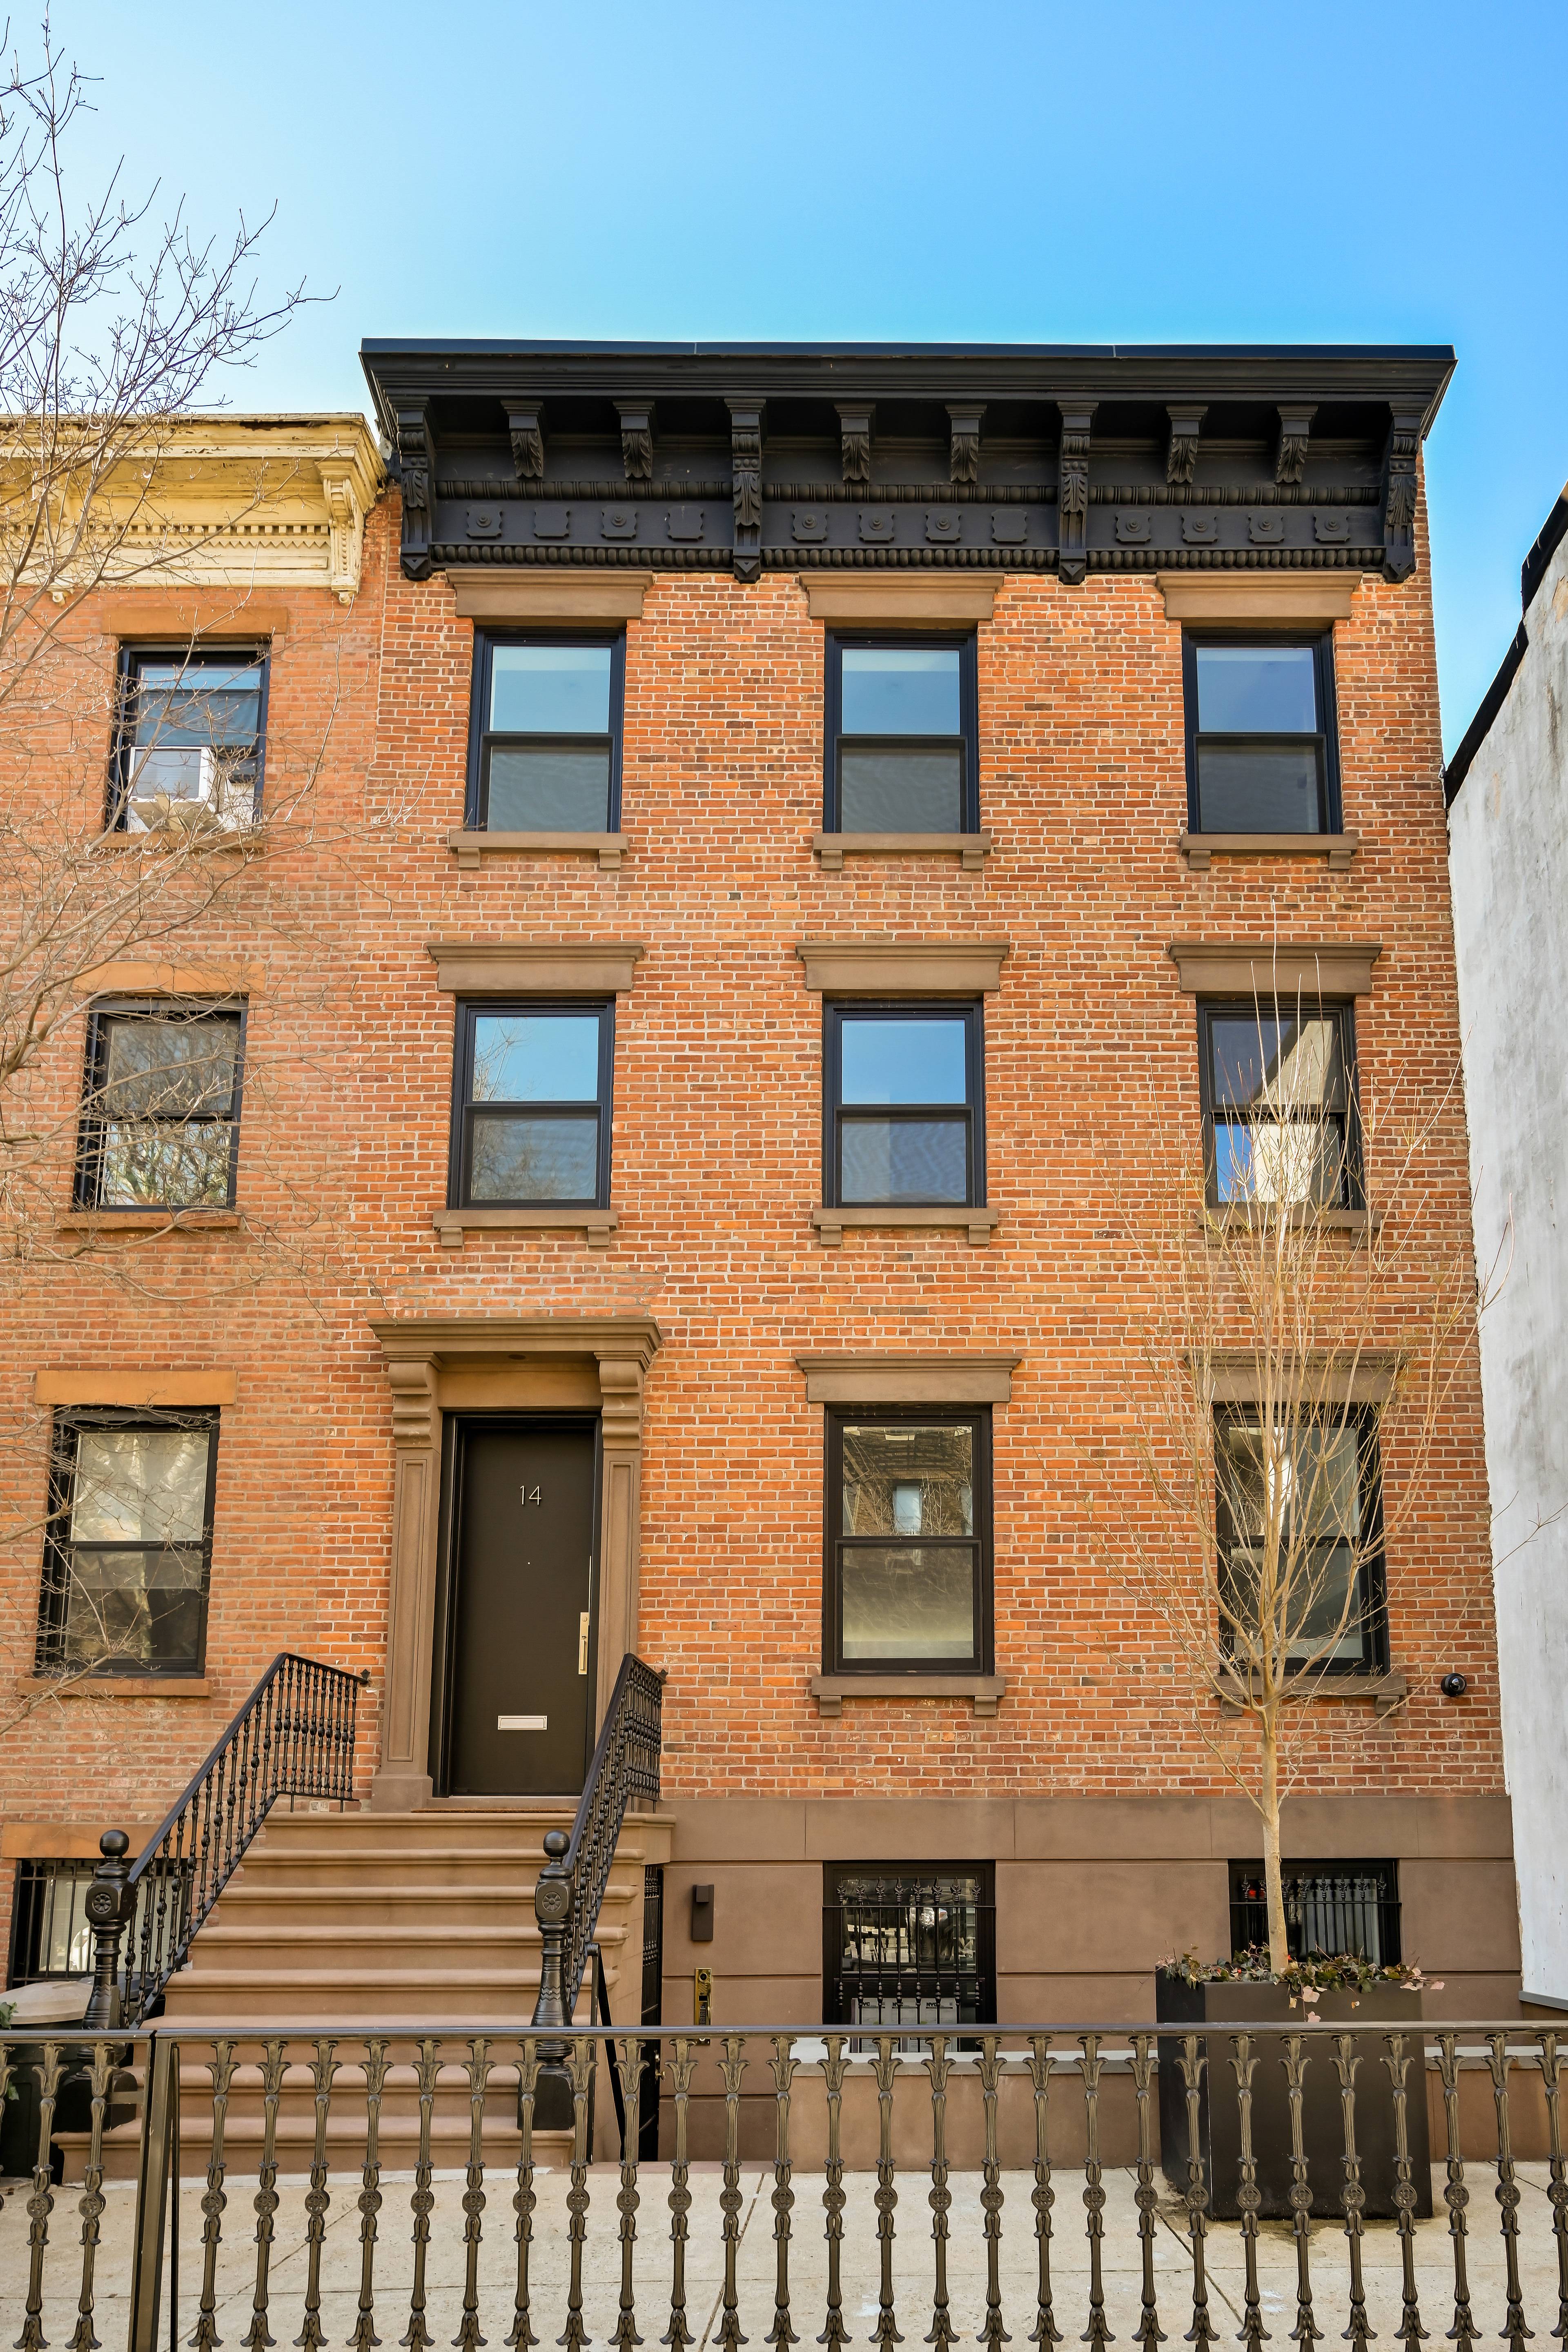 14 Wyckoff Street is a 25 foot wide, legal two family townhouse that has been painstakingly renovated and completed in 2020 by iGrace to the highest caliber of workmanship and ...